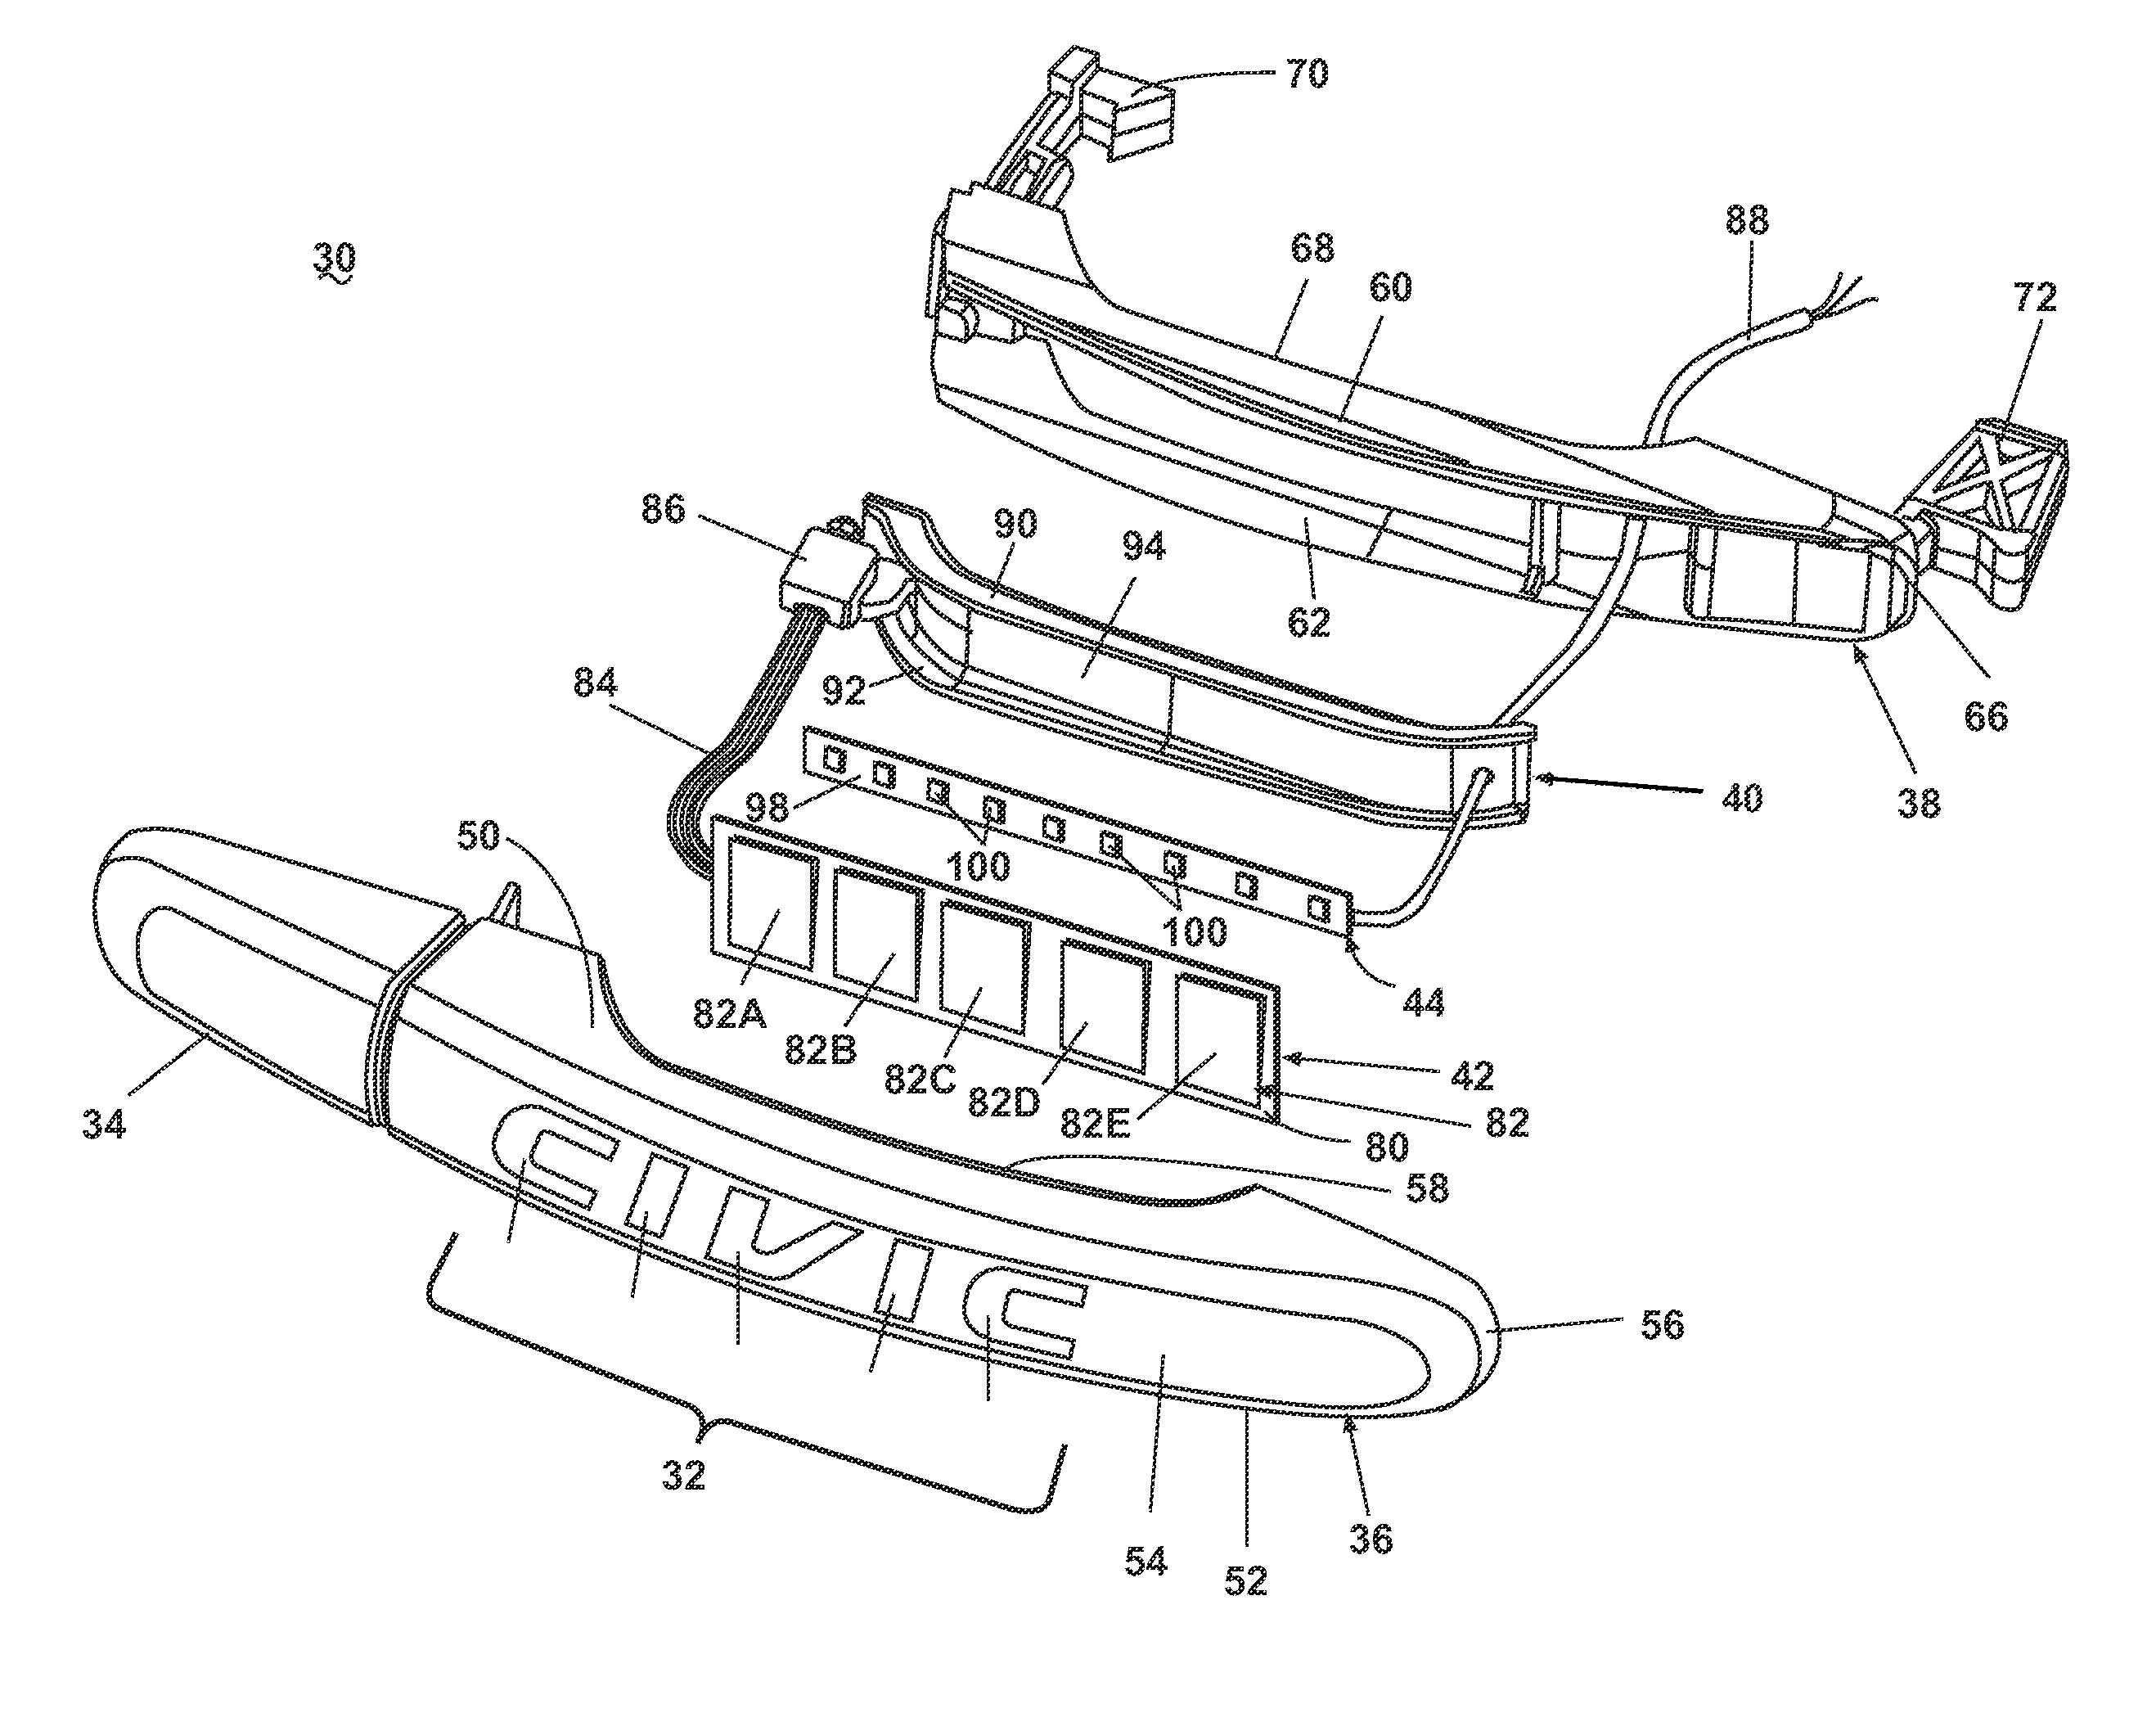 Keyless entry system incorporating concealable keypad